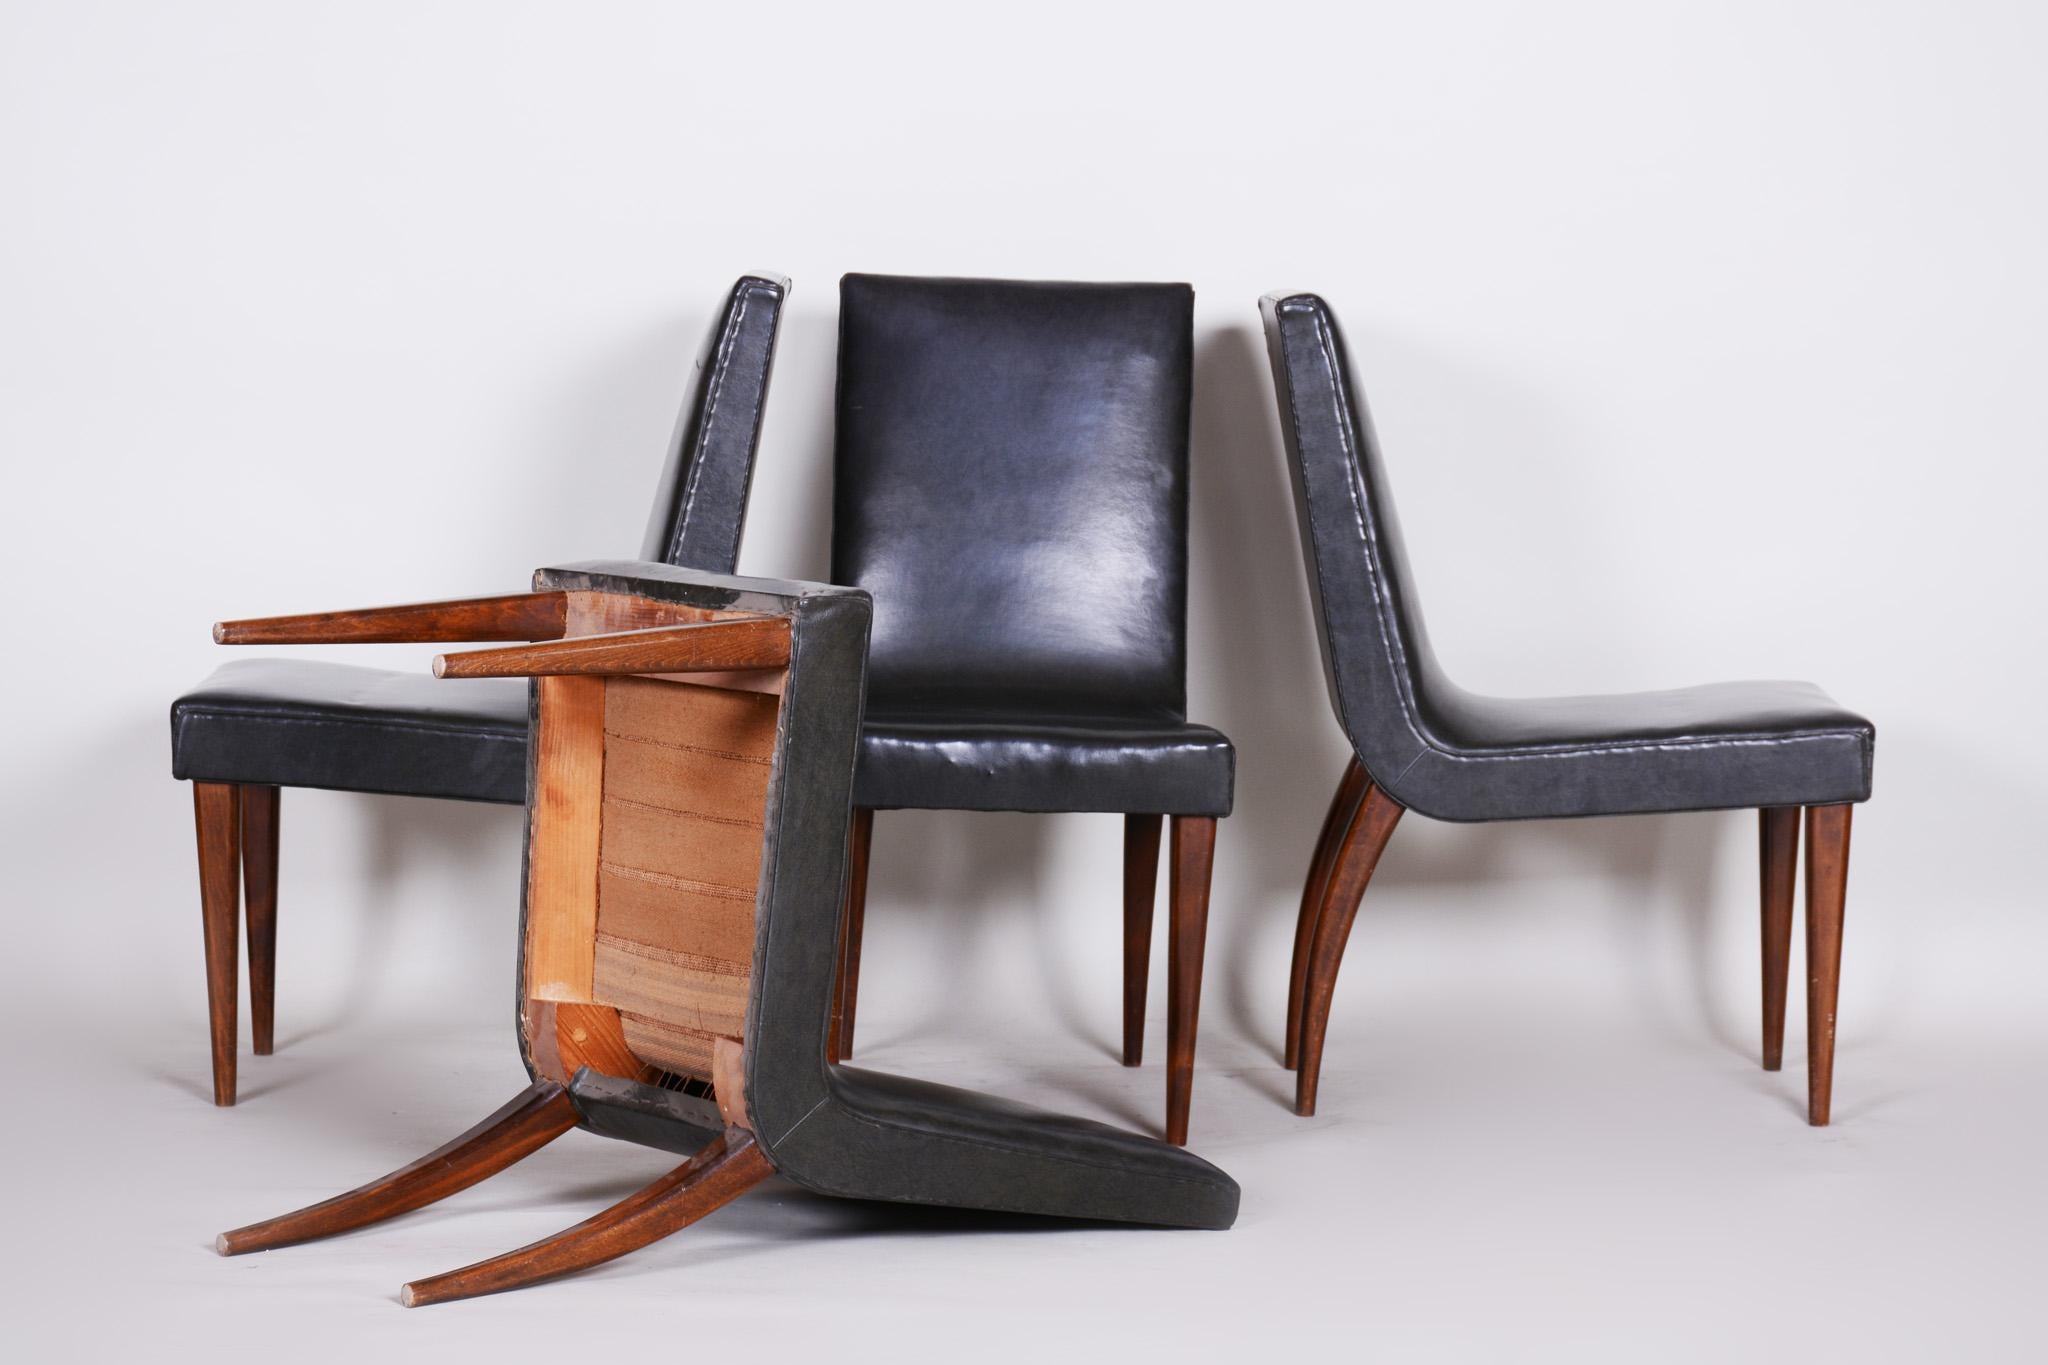 Czech Art Deco chairs, 4 pcs
Material: Beech
Period: 1930-1939
Original preserved condition
Made by architect Jindrich Halabala in United Arts & Crafts manufacture in Brno.





 